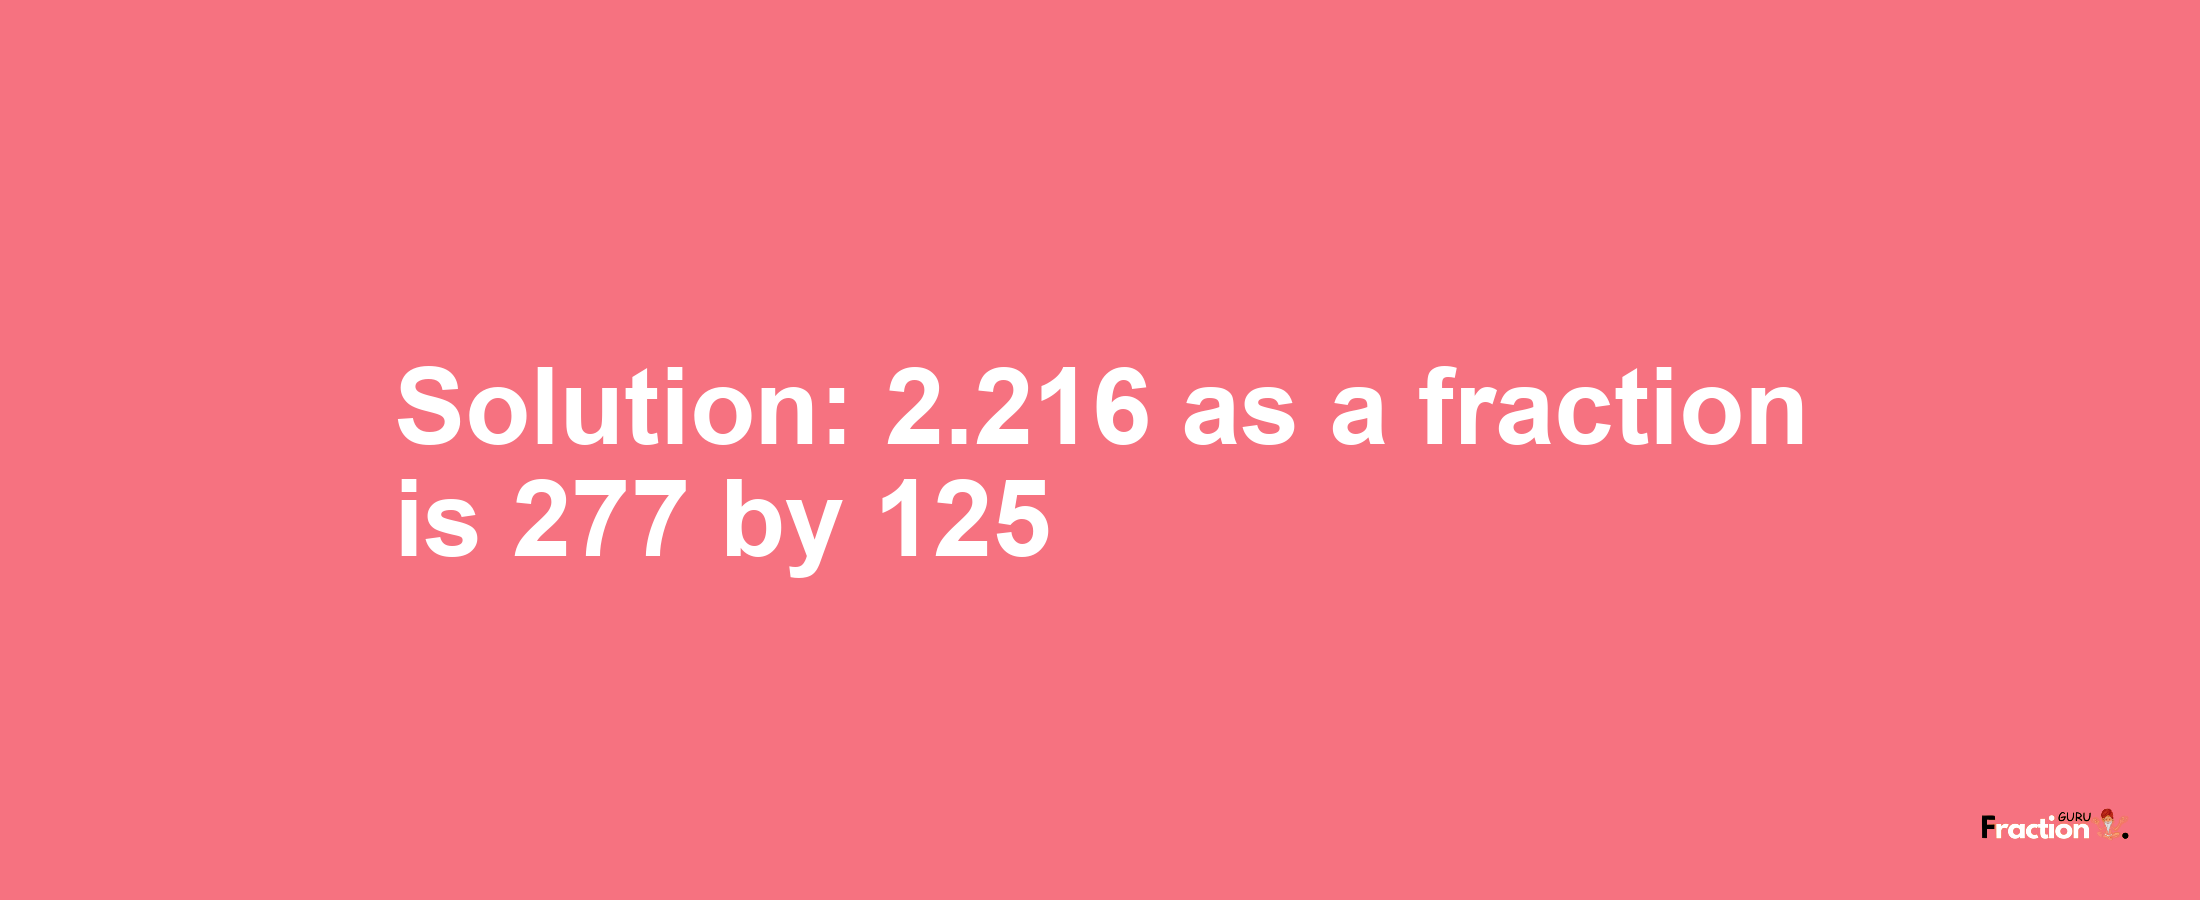 Solution:2.216 as a fraction is 277/125